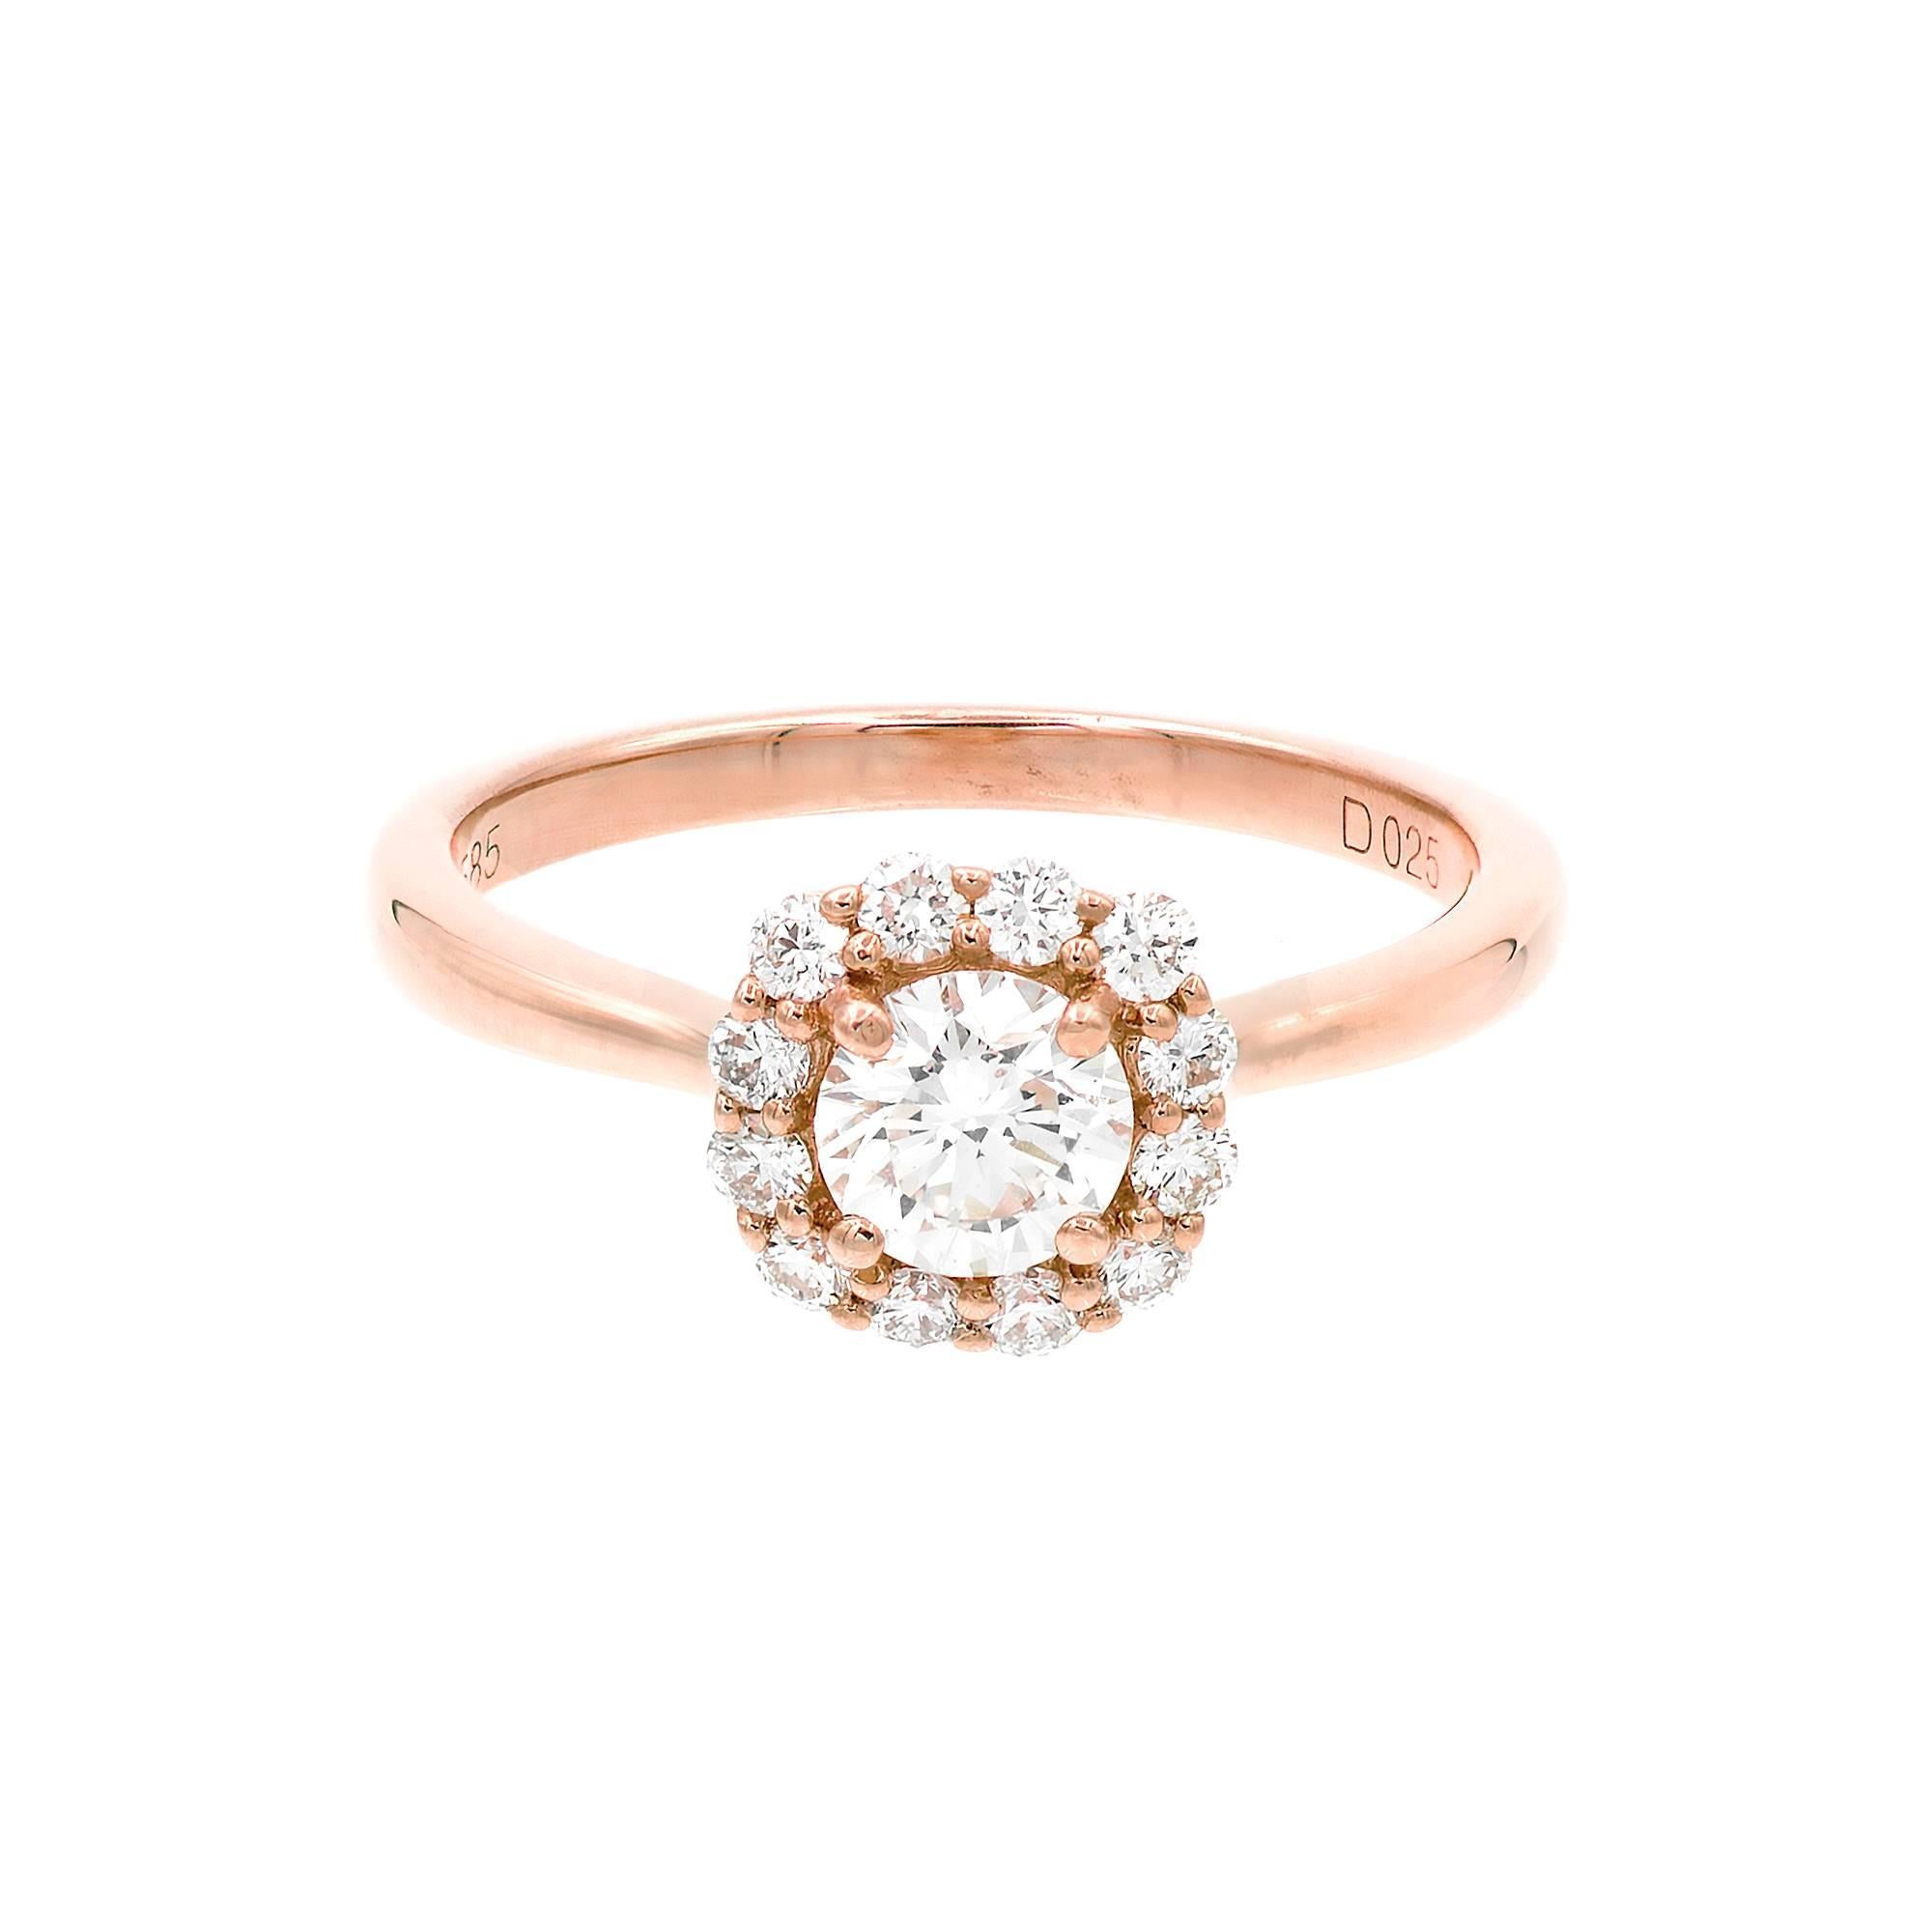 Peter Suchy Vintage Inspired 14k rose gold halo Diamond engagement ring. GIA certified .51ct center Diamond F, SI1, surrounded by 0.25ct of F, VS full cut Diamonds.

1 round brilliant cut Diamond, approx. total weight .51cts, F, SI1, GIA certificate